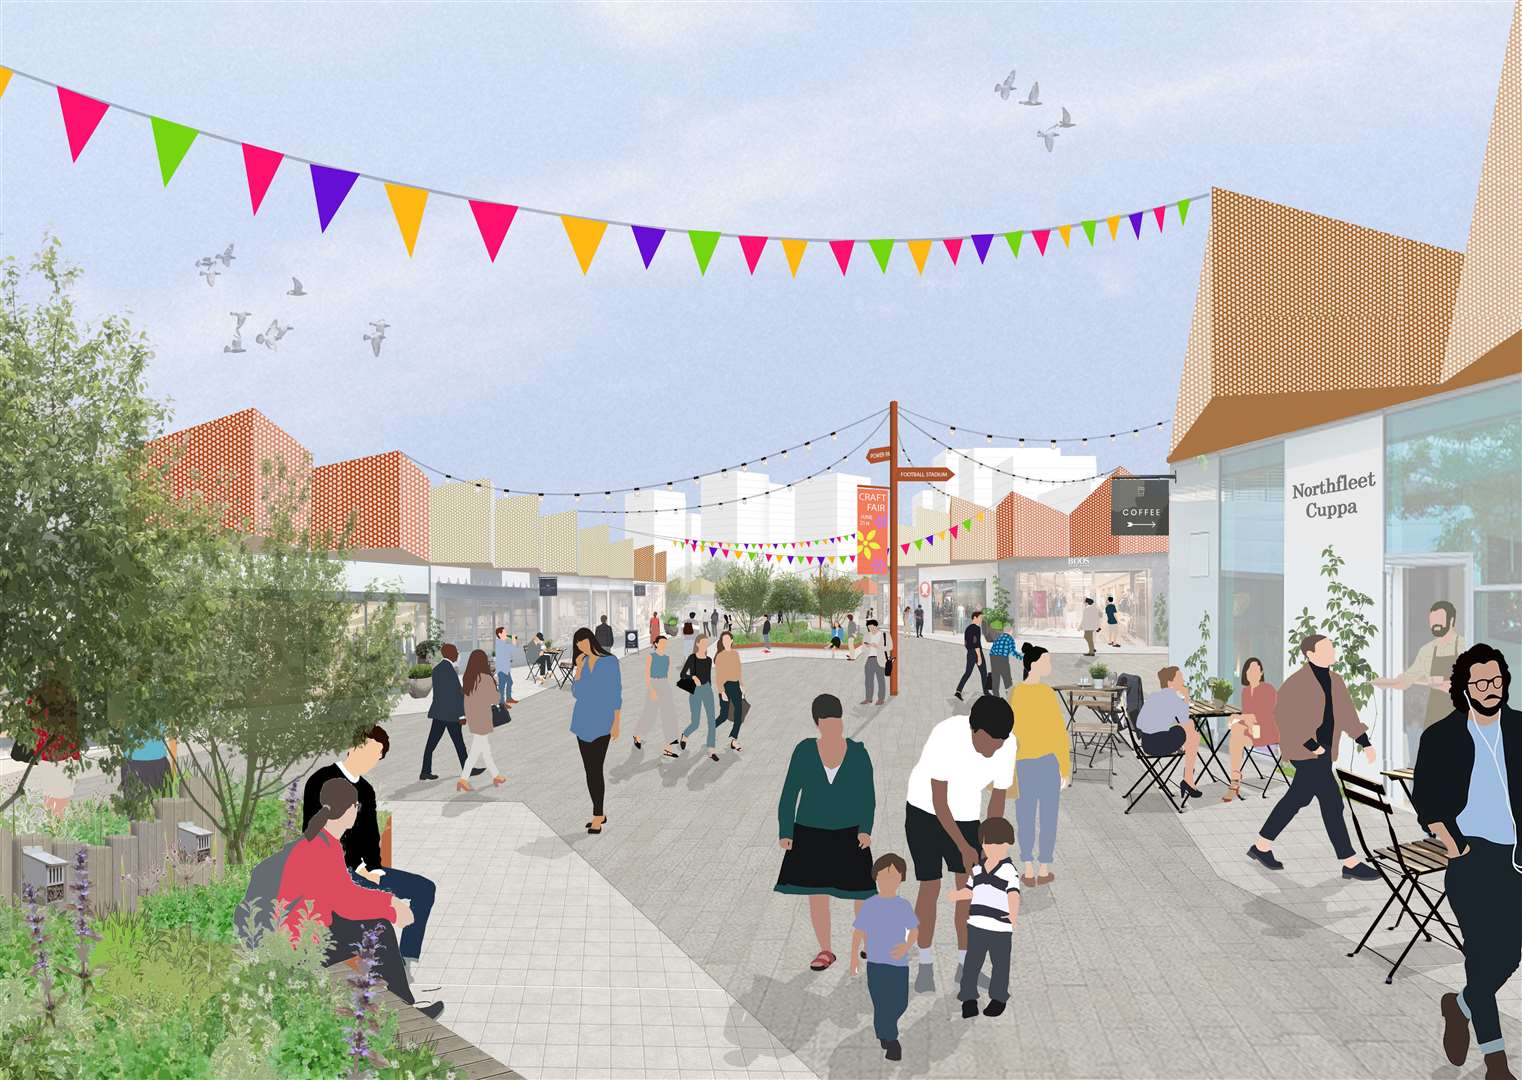 Plans feature a new retail village features a new retail village consisting of 225,000 sq ft of shops, restaurants, bars and cafes. Photo: Northfleet Harbourside